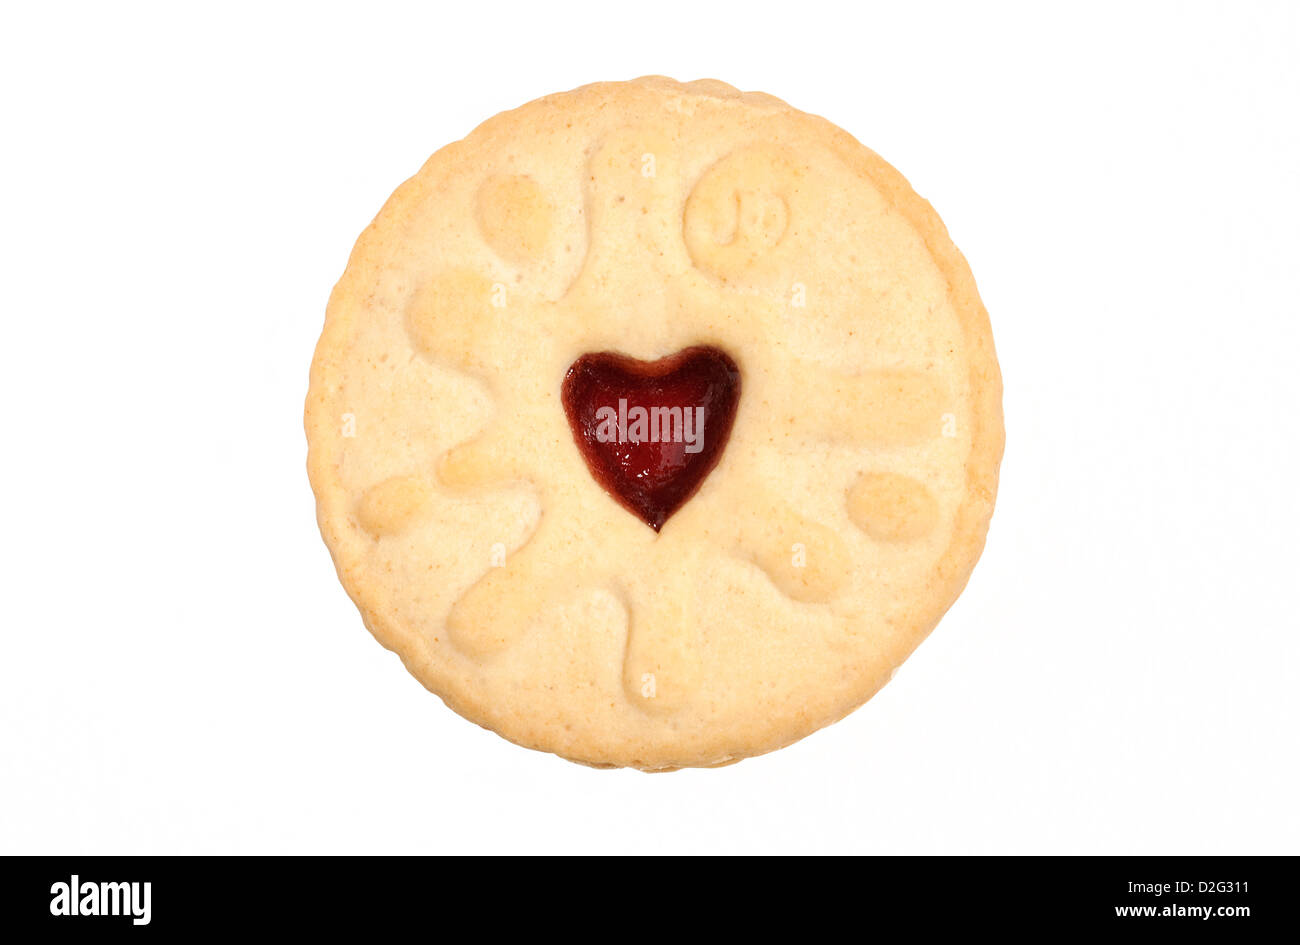 jammie dodger biscuit on white background Stock Photo